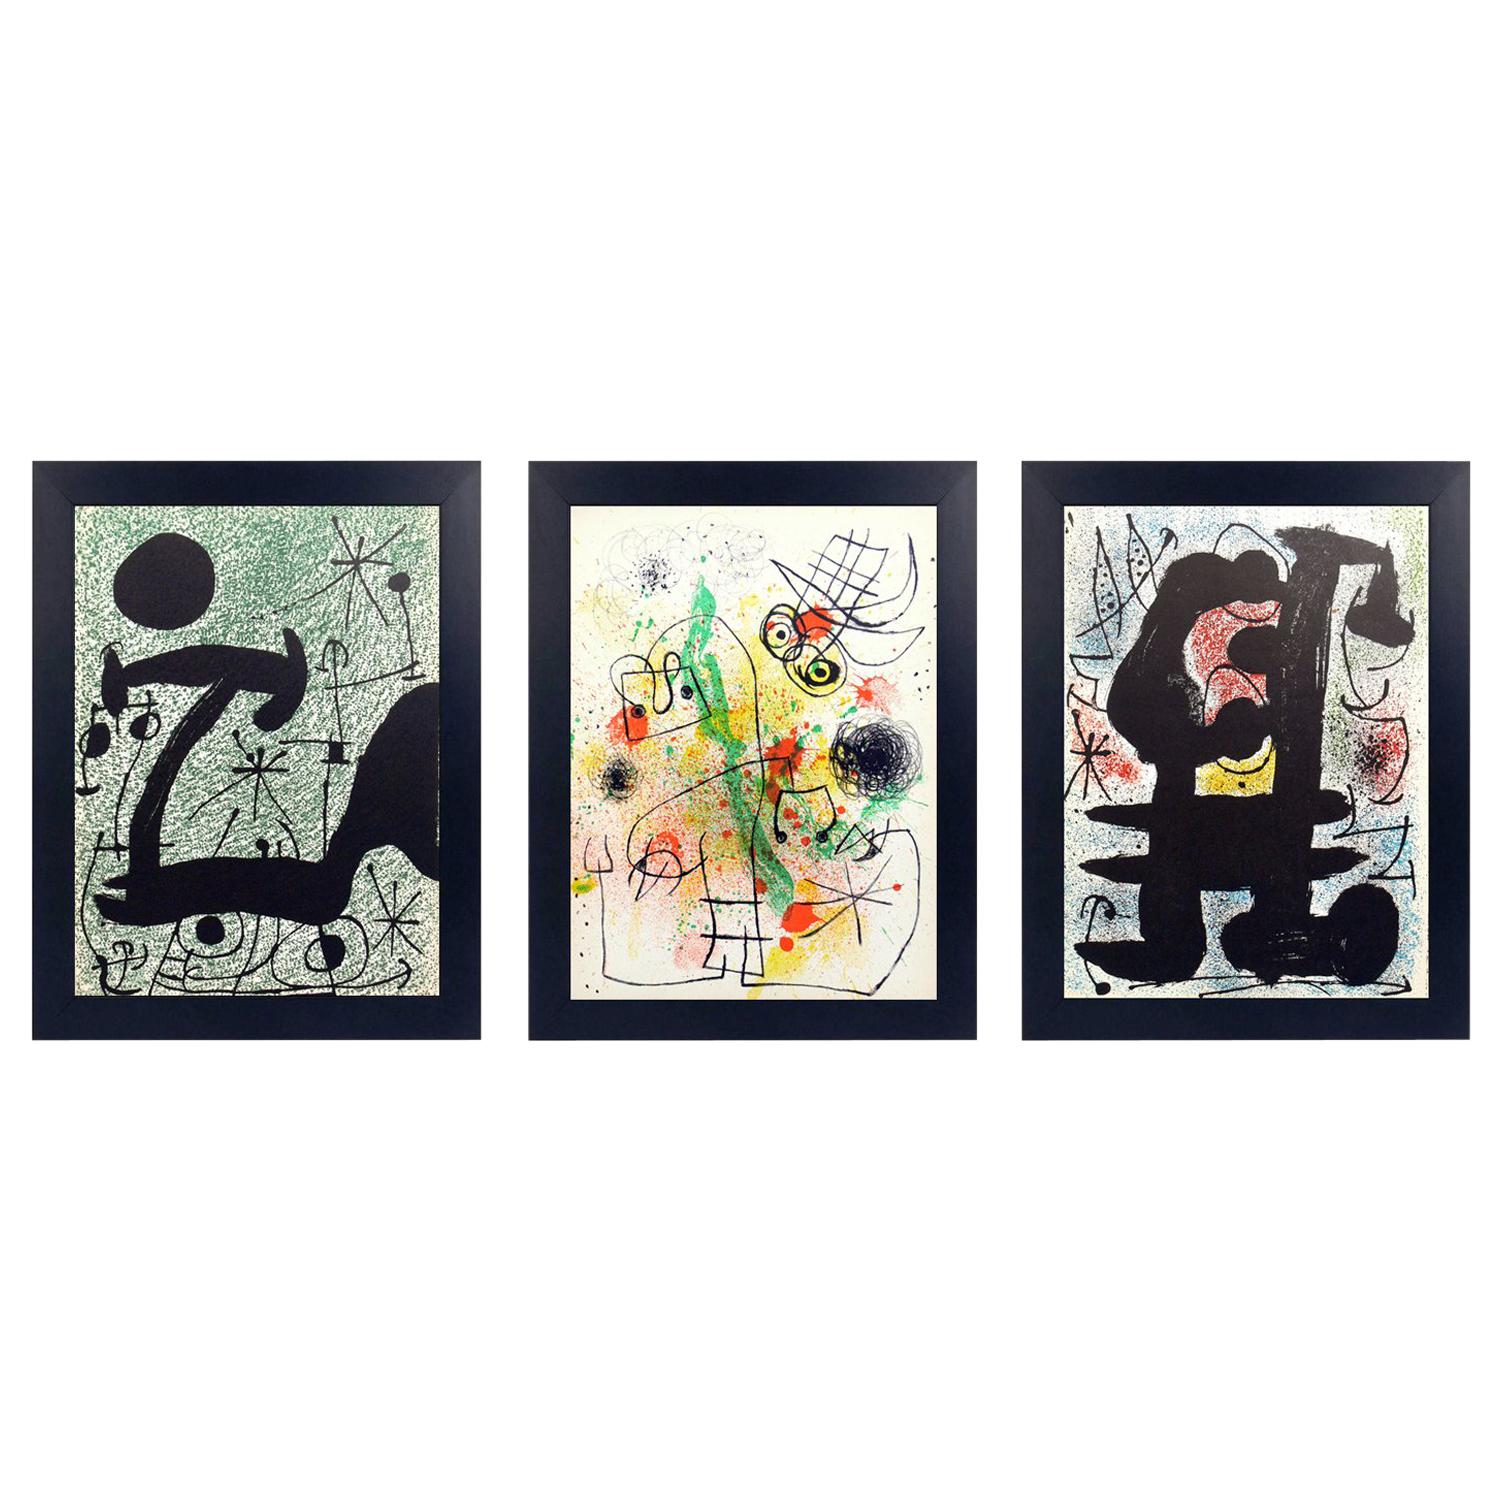 Selection of Joan Miro color lithographs, France, circa 1960s. We purchased a group of these color lithographs from the estate of a couple that lived in France from 1951-1983. These are most likely from the limited edition folio “Derriere Le